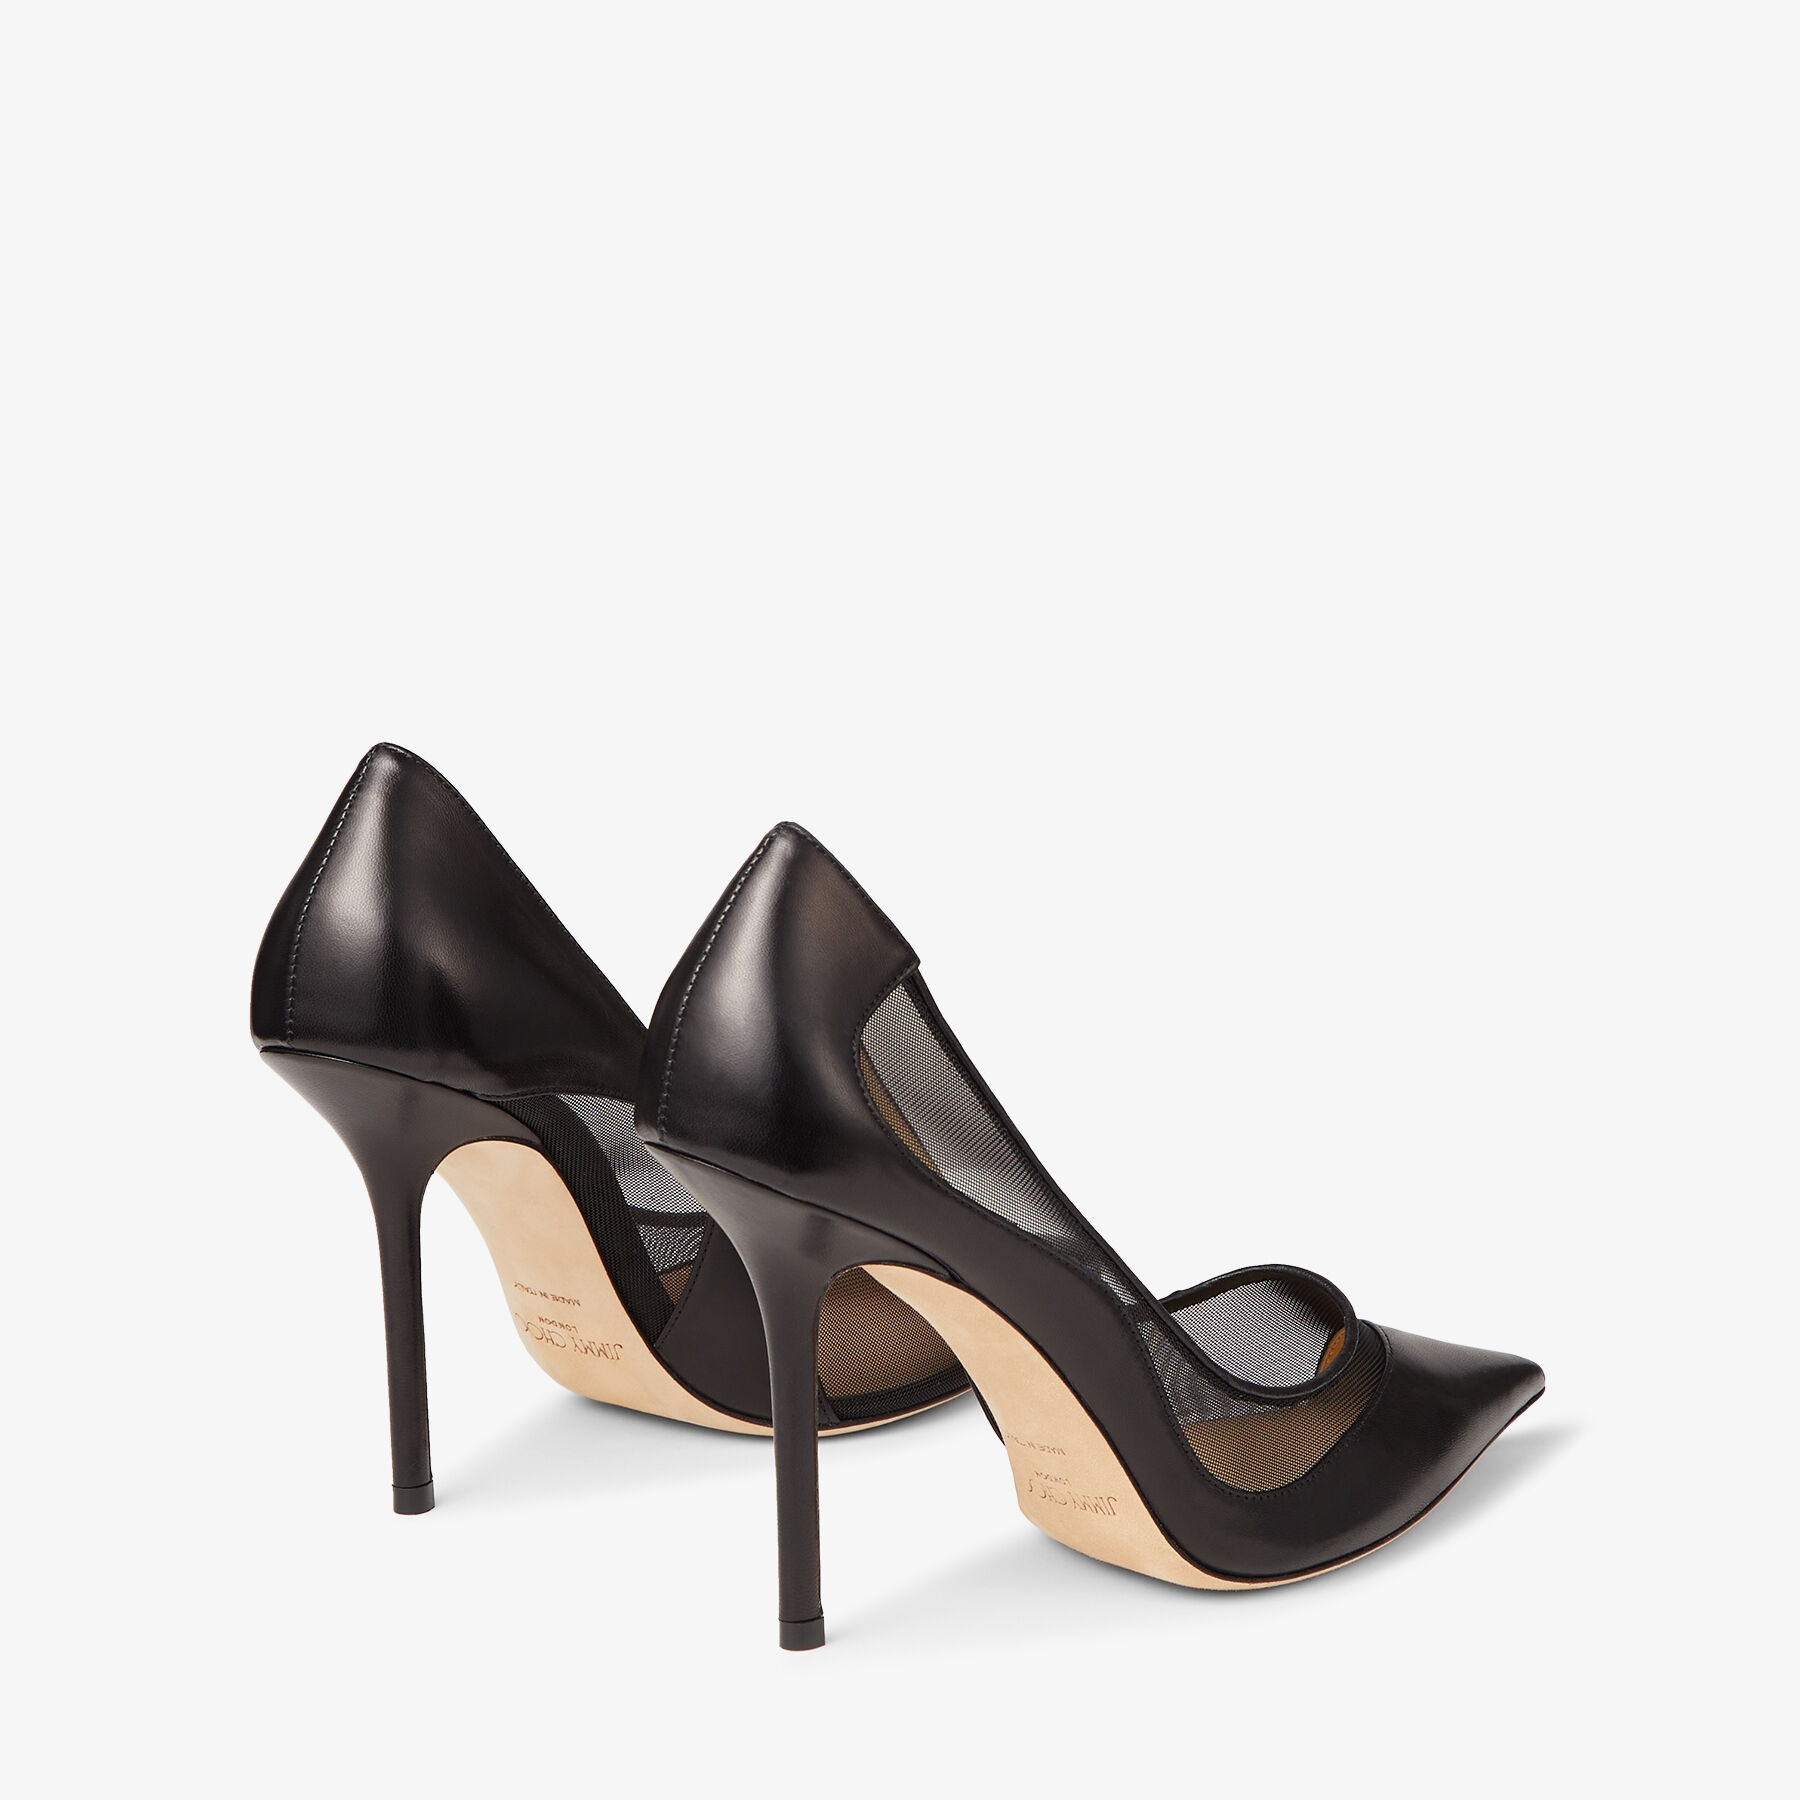 Love 100
Black Nappa and Mesh Pointed-Toe Pumps - 6